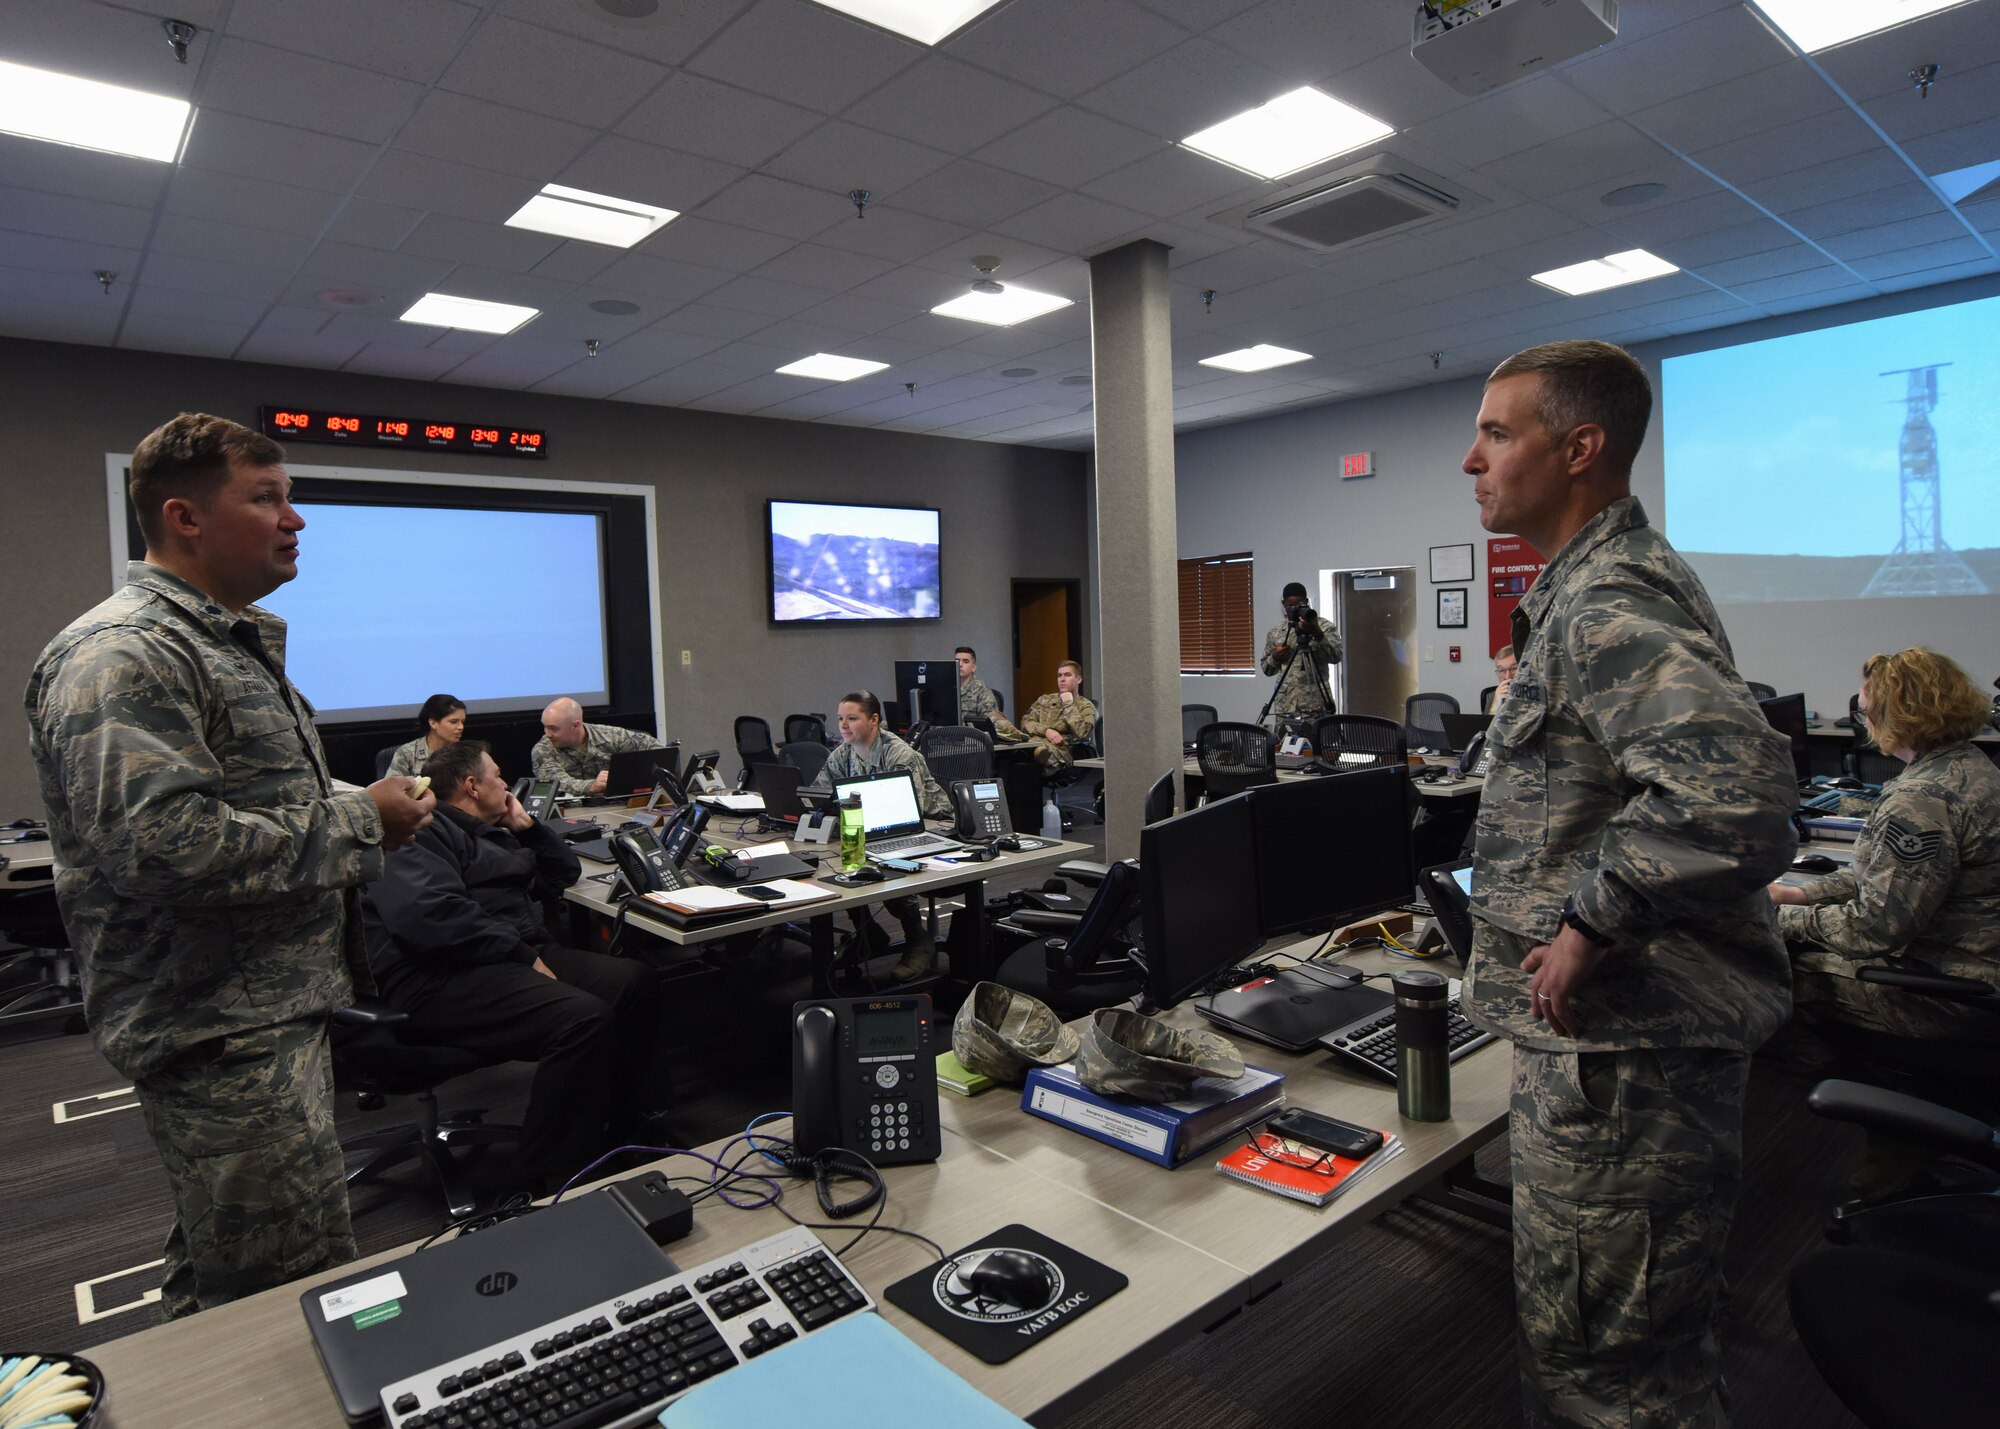 Col. Michael Hunsberger, 30th Mission Support Group commander, and Lt. Col. Jason Aftanas, 30th Civil Engineer Squadron commander, discuss the post operations of the Spaceflight SSO-A: SmallSat Express on a SpaceX Falcon 9 rocket at the Emergency Operation Center, here, Dec. 3, 2018 at 10:34 a.m. “The purpose of the Emergency Operations Center is to support the incident commander, who is typically the head of the Fire Department, with any needs they have if an incident were to occur,” said Hunsberger. (U.S. Air Force photo by Airman 1st Class Aubree Milks/Released)